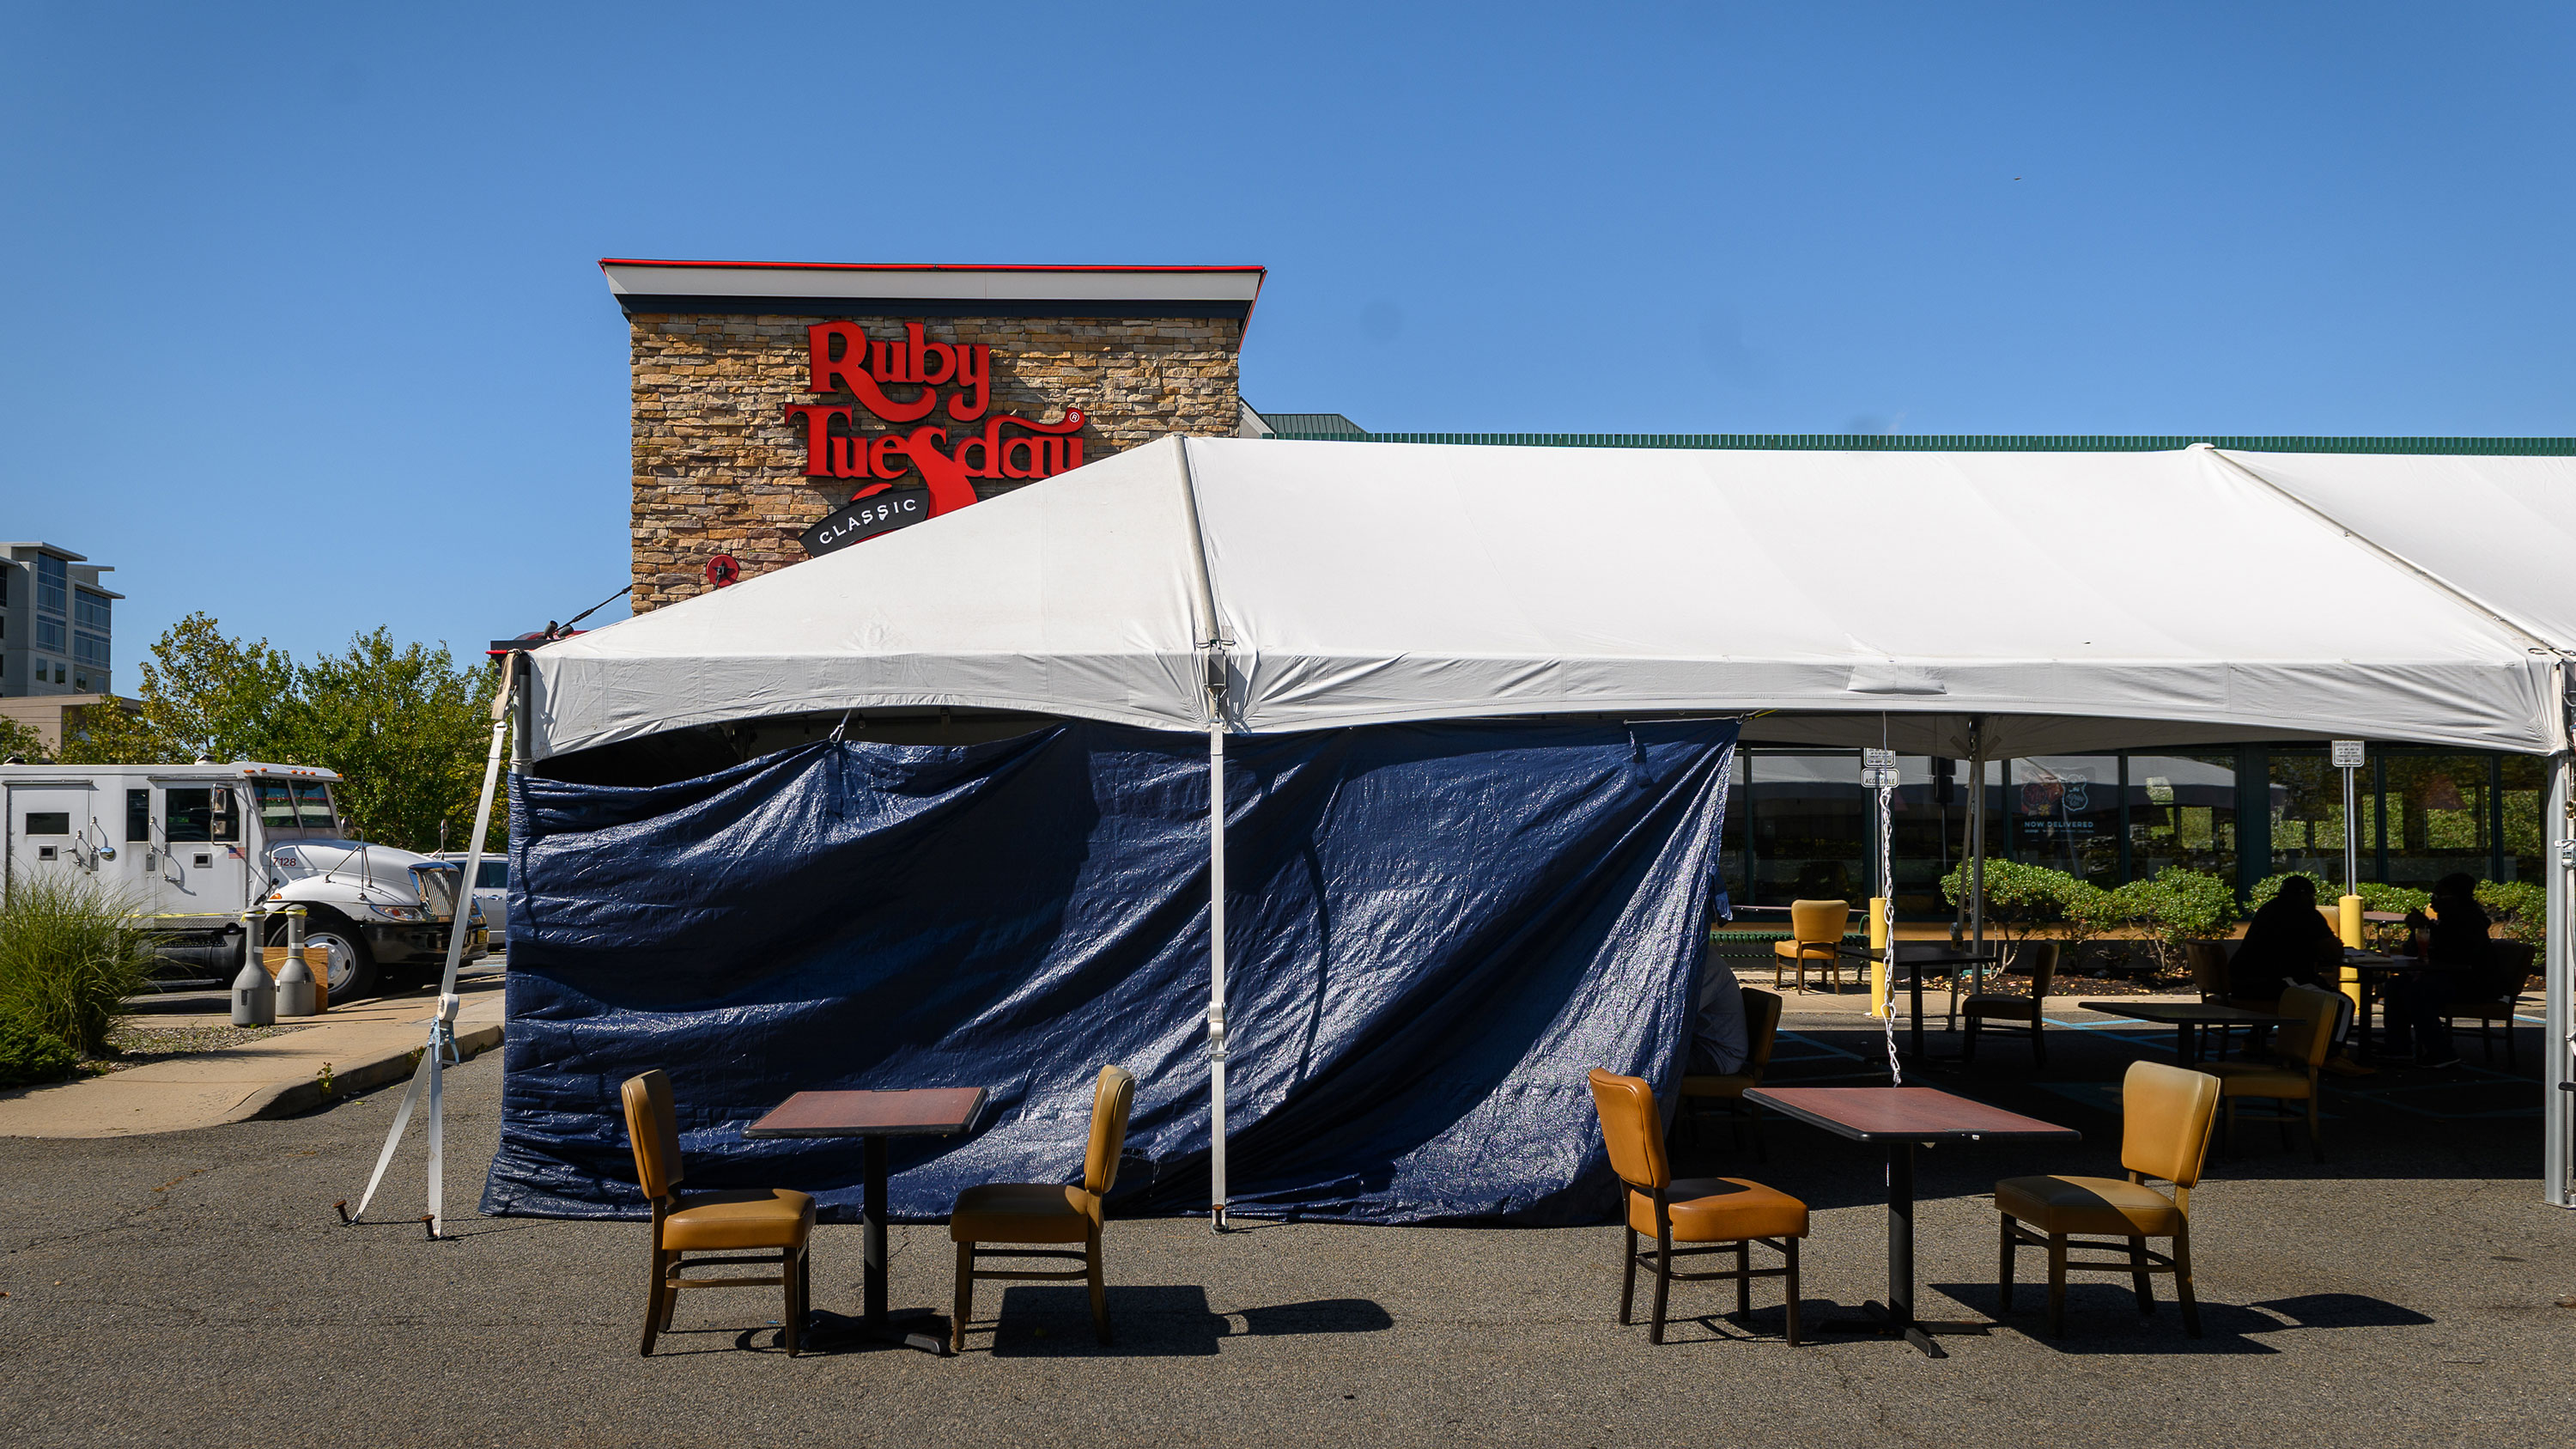 An outdoor dining area is set up outside a Ruby Tuesday restaurant in Elizabeth, New Jersey, on October 9.